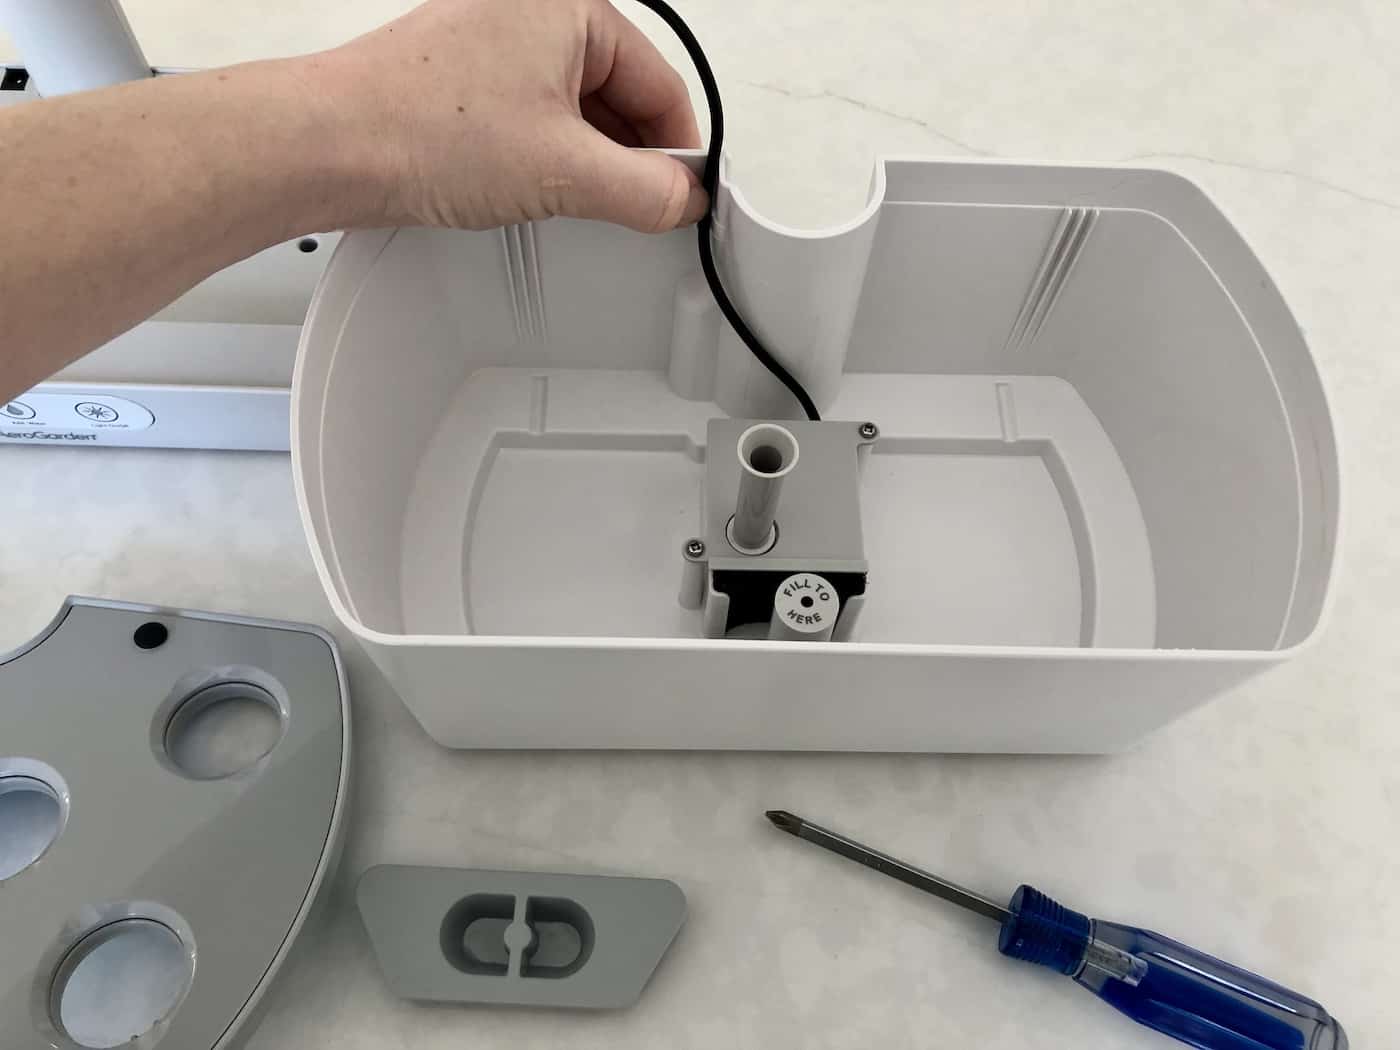 Reattaching pump cord in water bowl